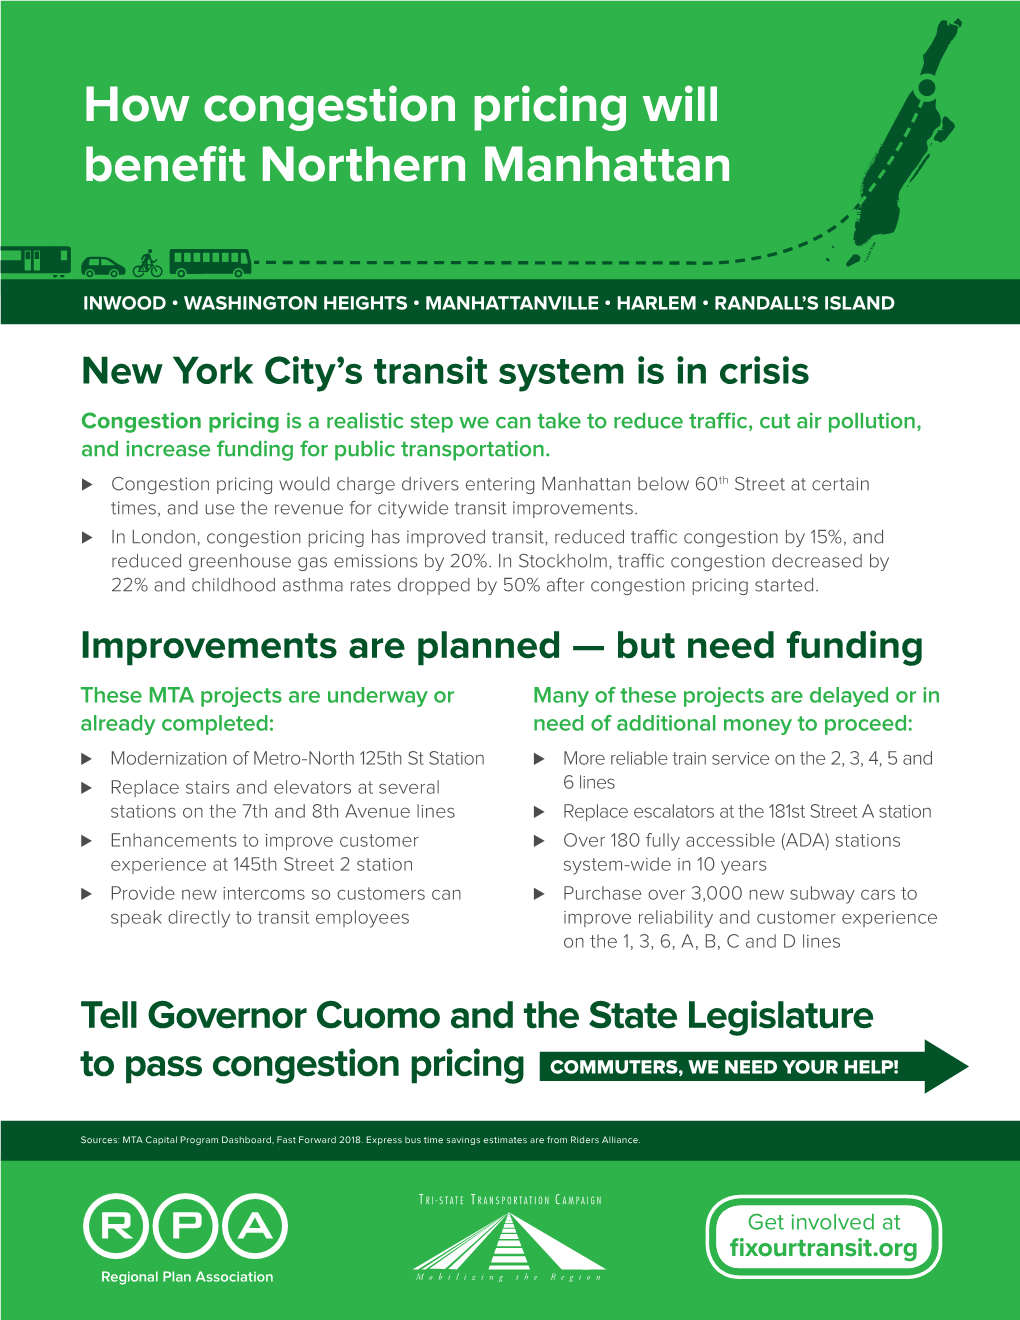 How Congestion Pricing Will Benefit Northern Manhattan